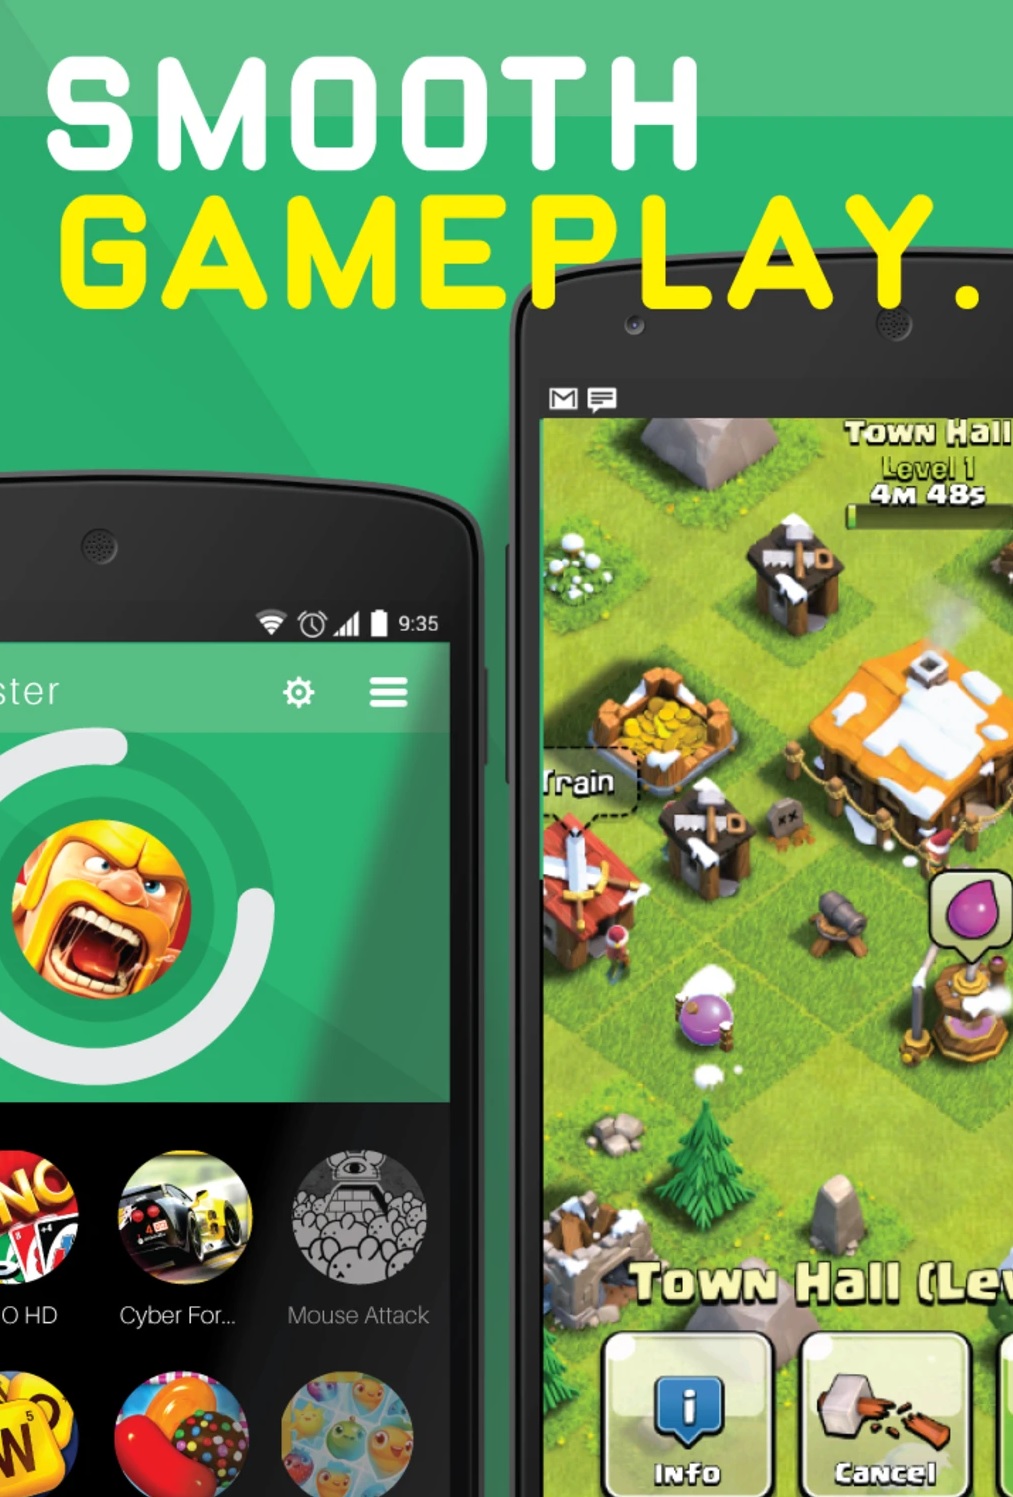 GAME BOOSTER SPEED UP PHONE APK DOWNLOAD 2023